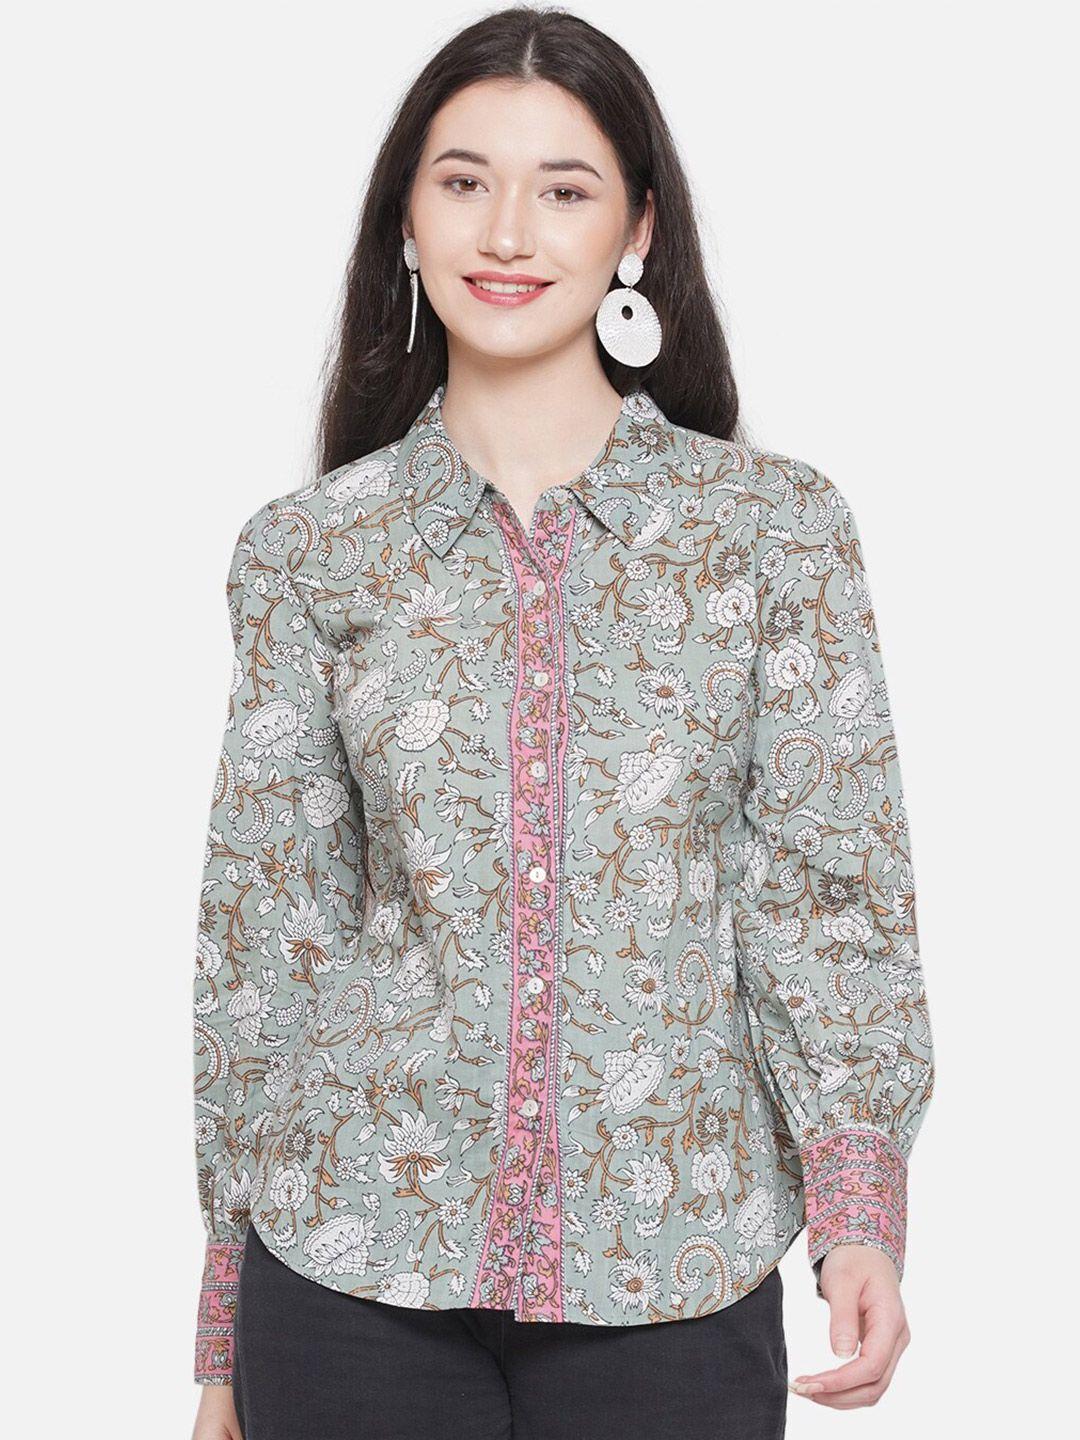 bellamia floral printed smart fit cotton casual shirt